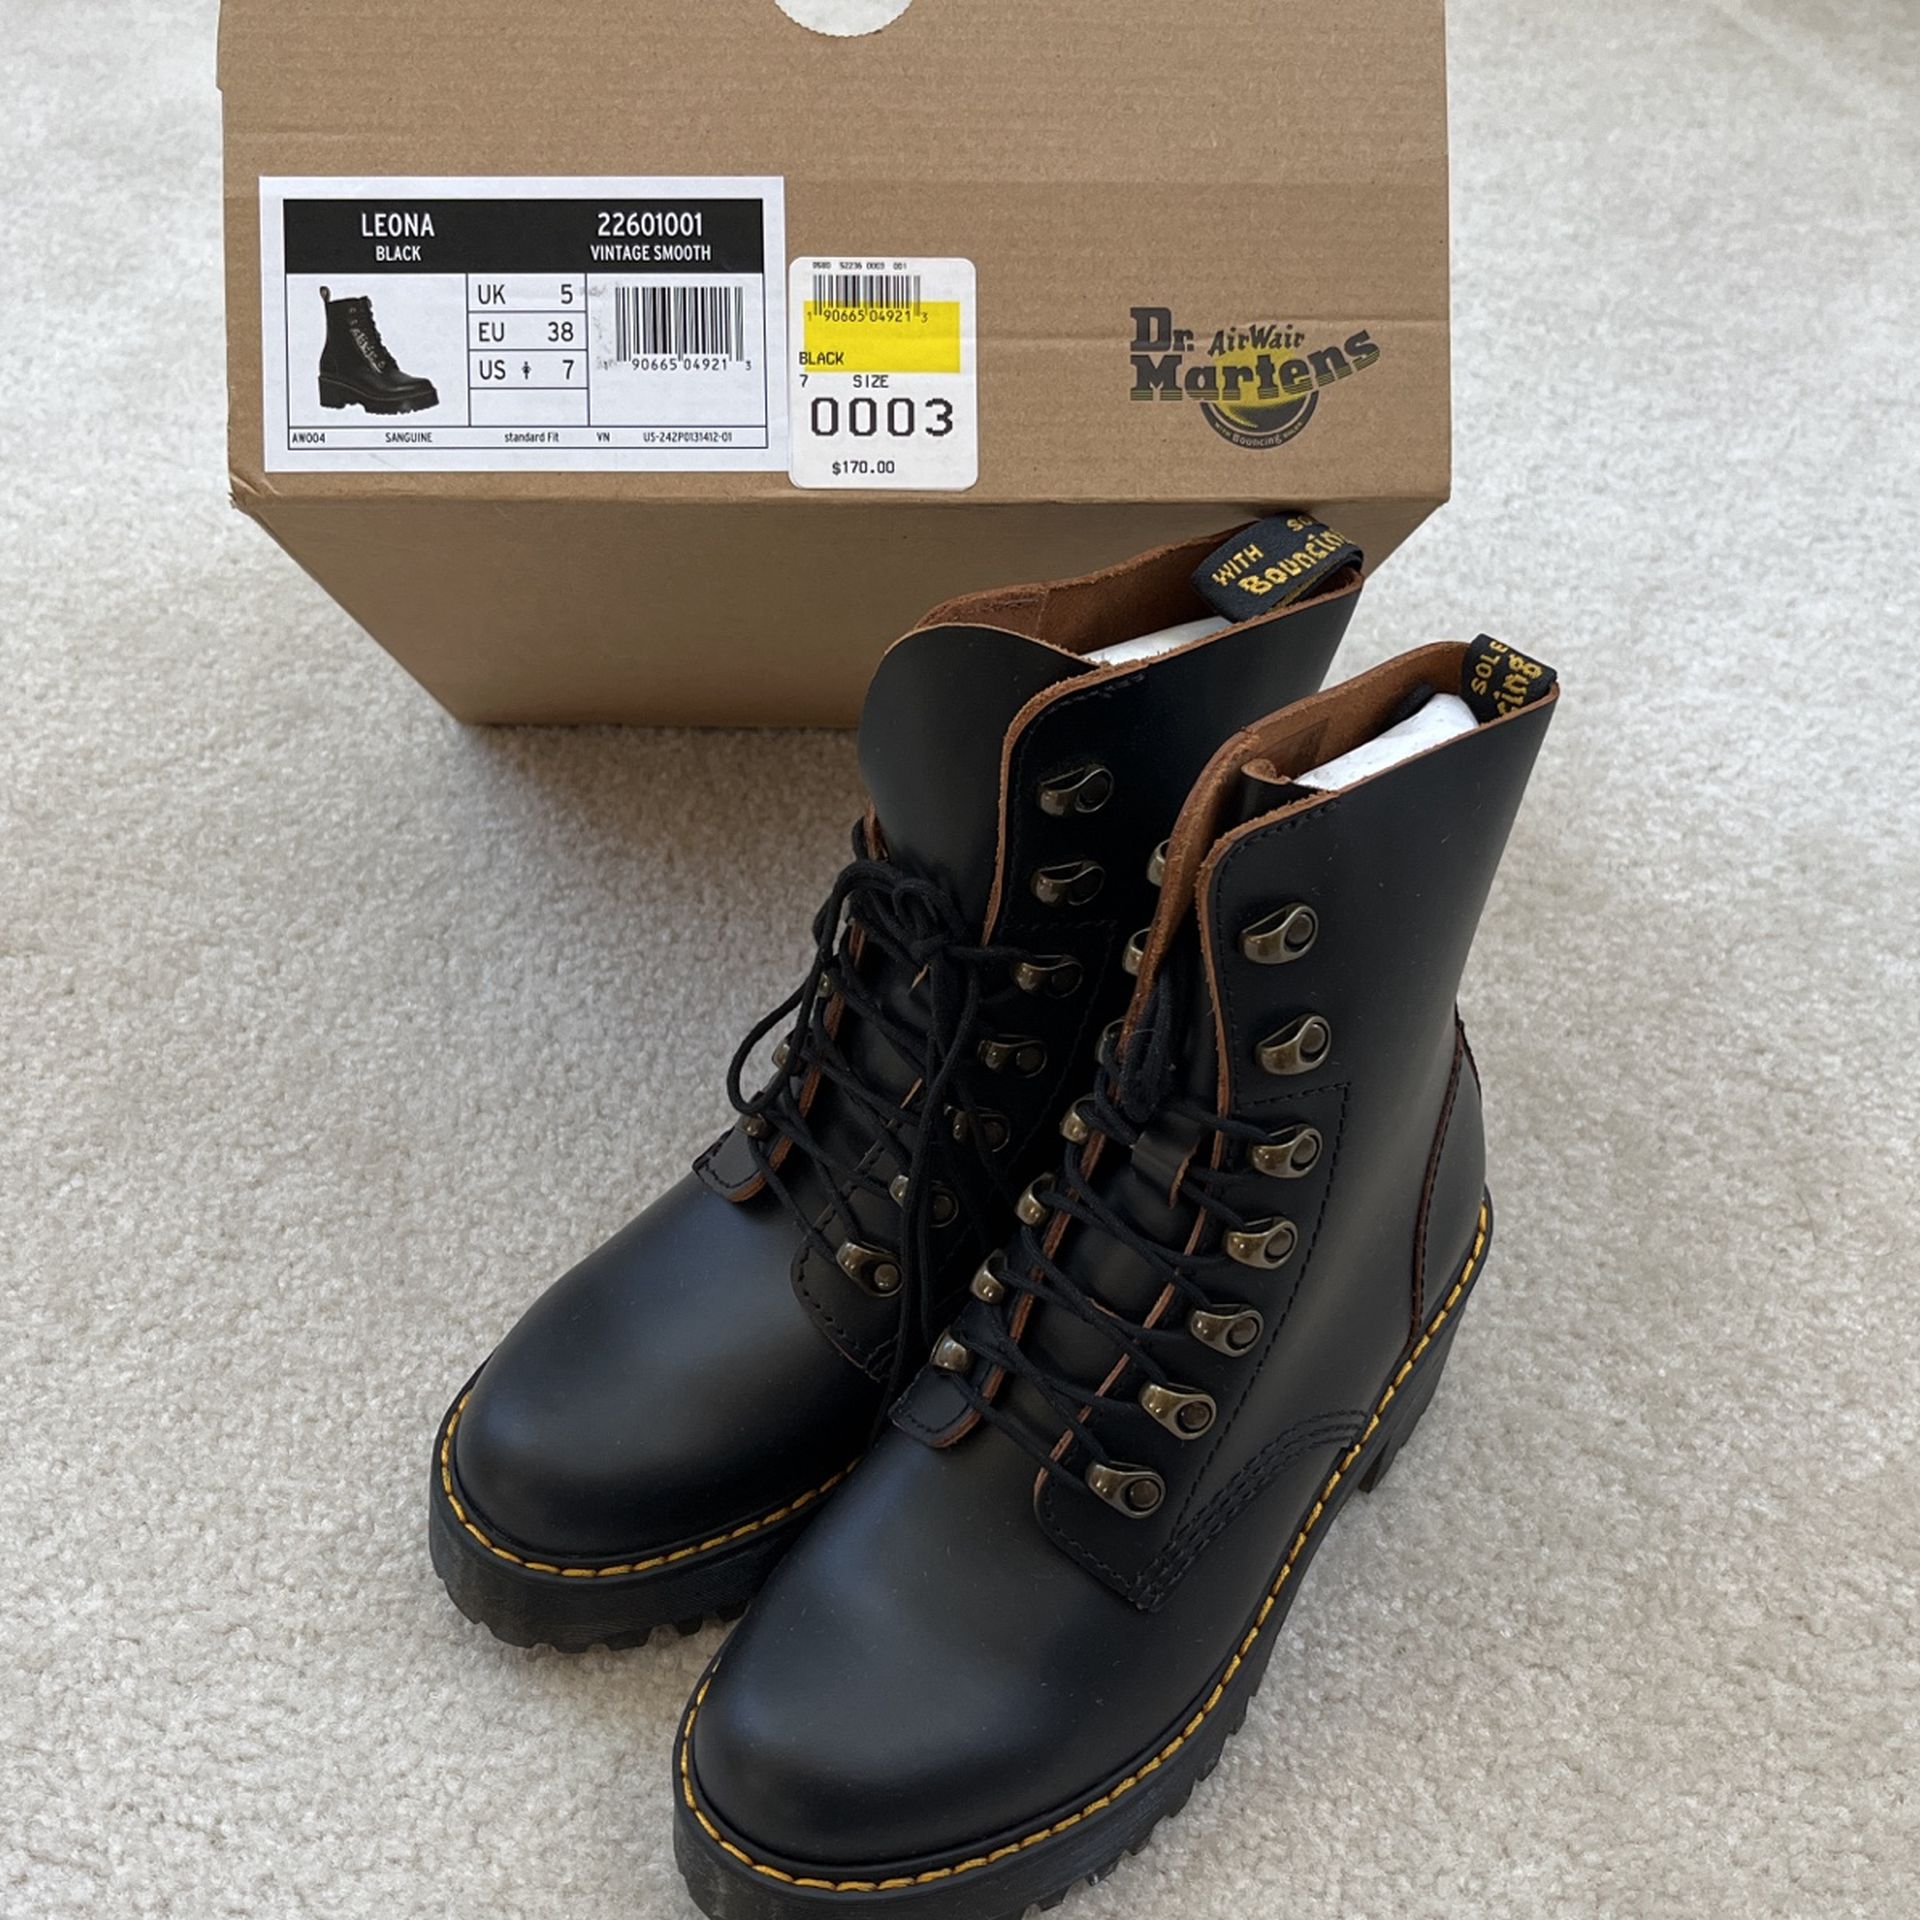 Brand new Dr Martens Leona Leather Boots